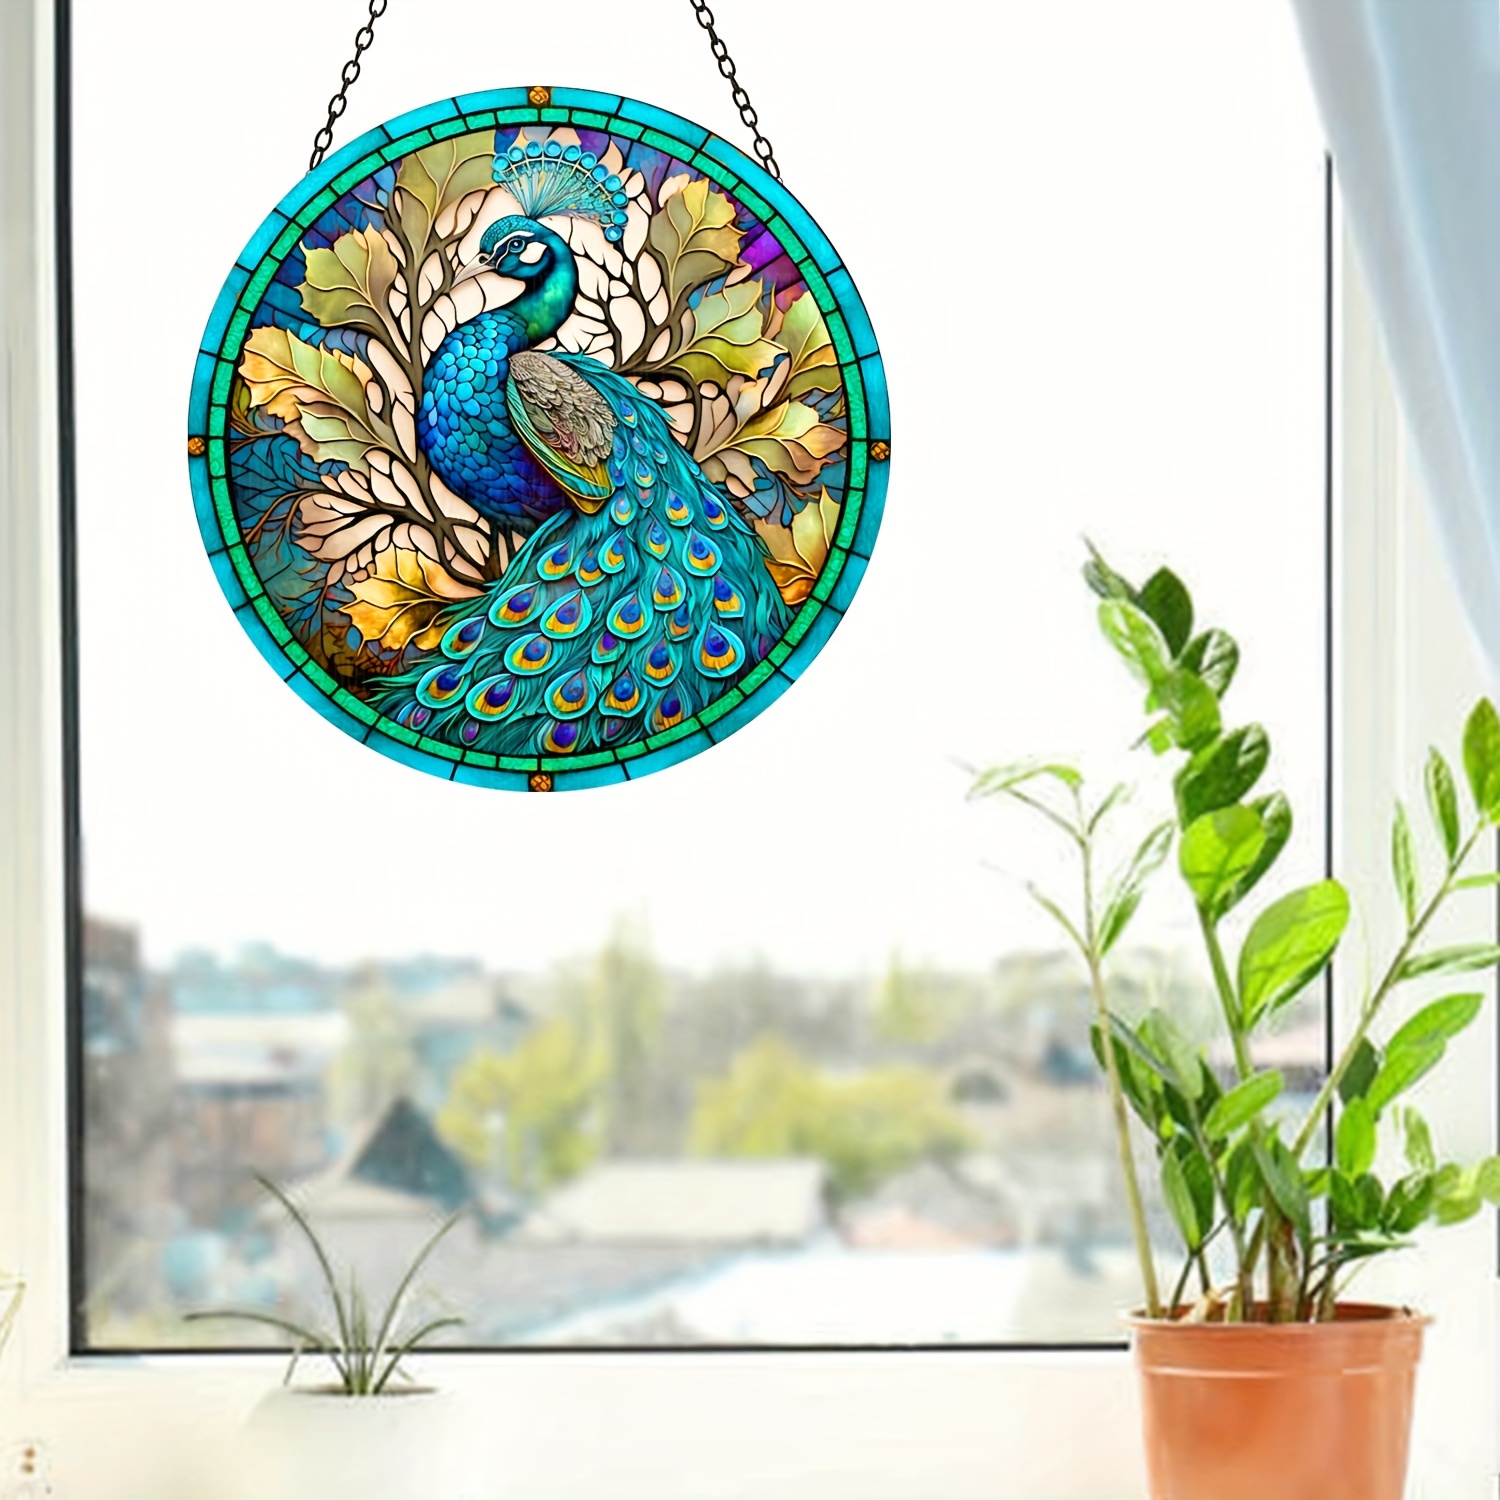 1pc 3D Peacock Stained Window Hangings, Peacock Decor Wall Art For Kitchen  Livingroom Office, October/Christmas Gift For Mom Women Aunt Sister Friend